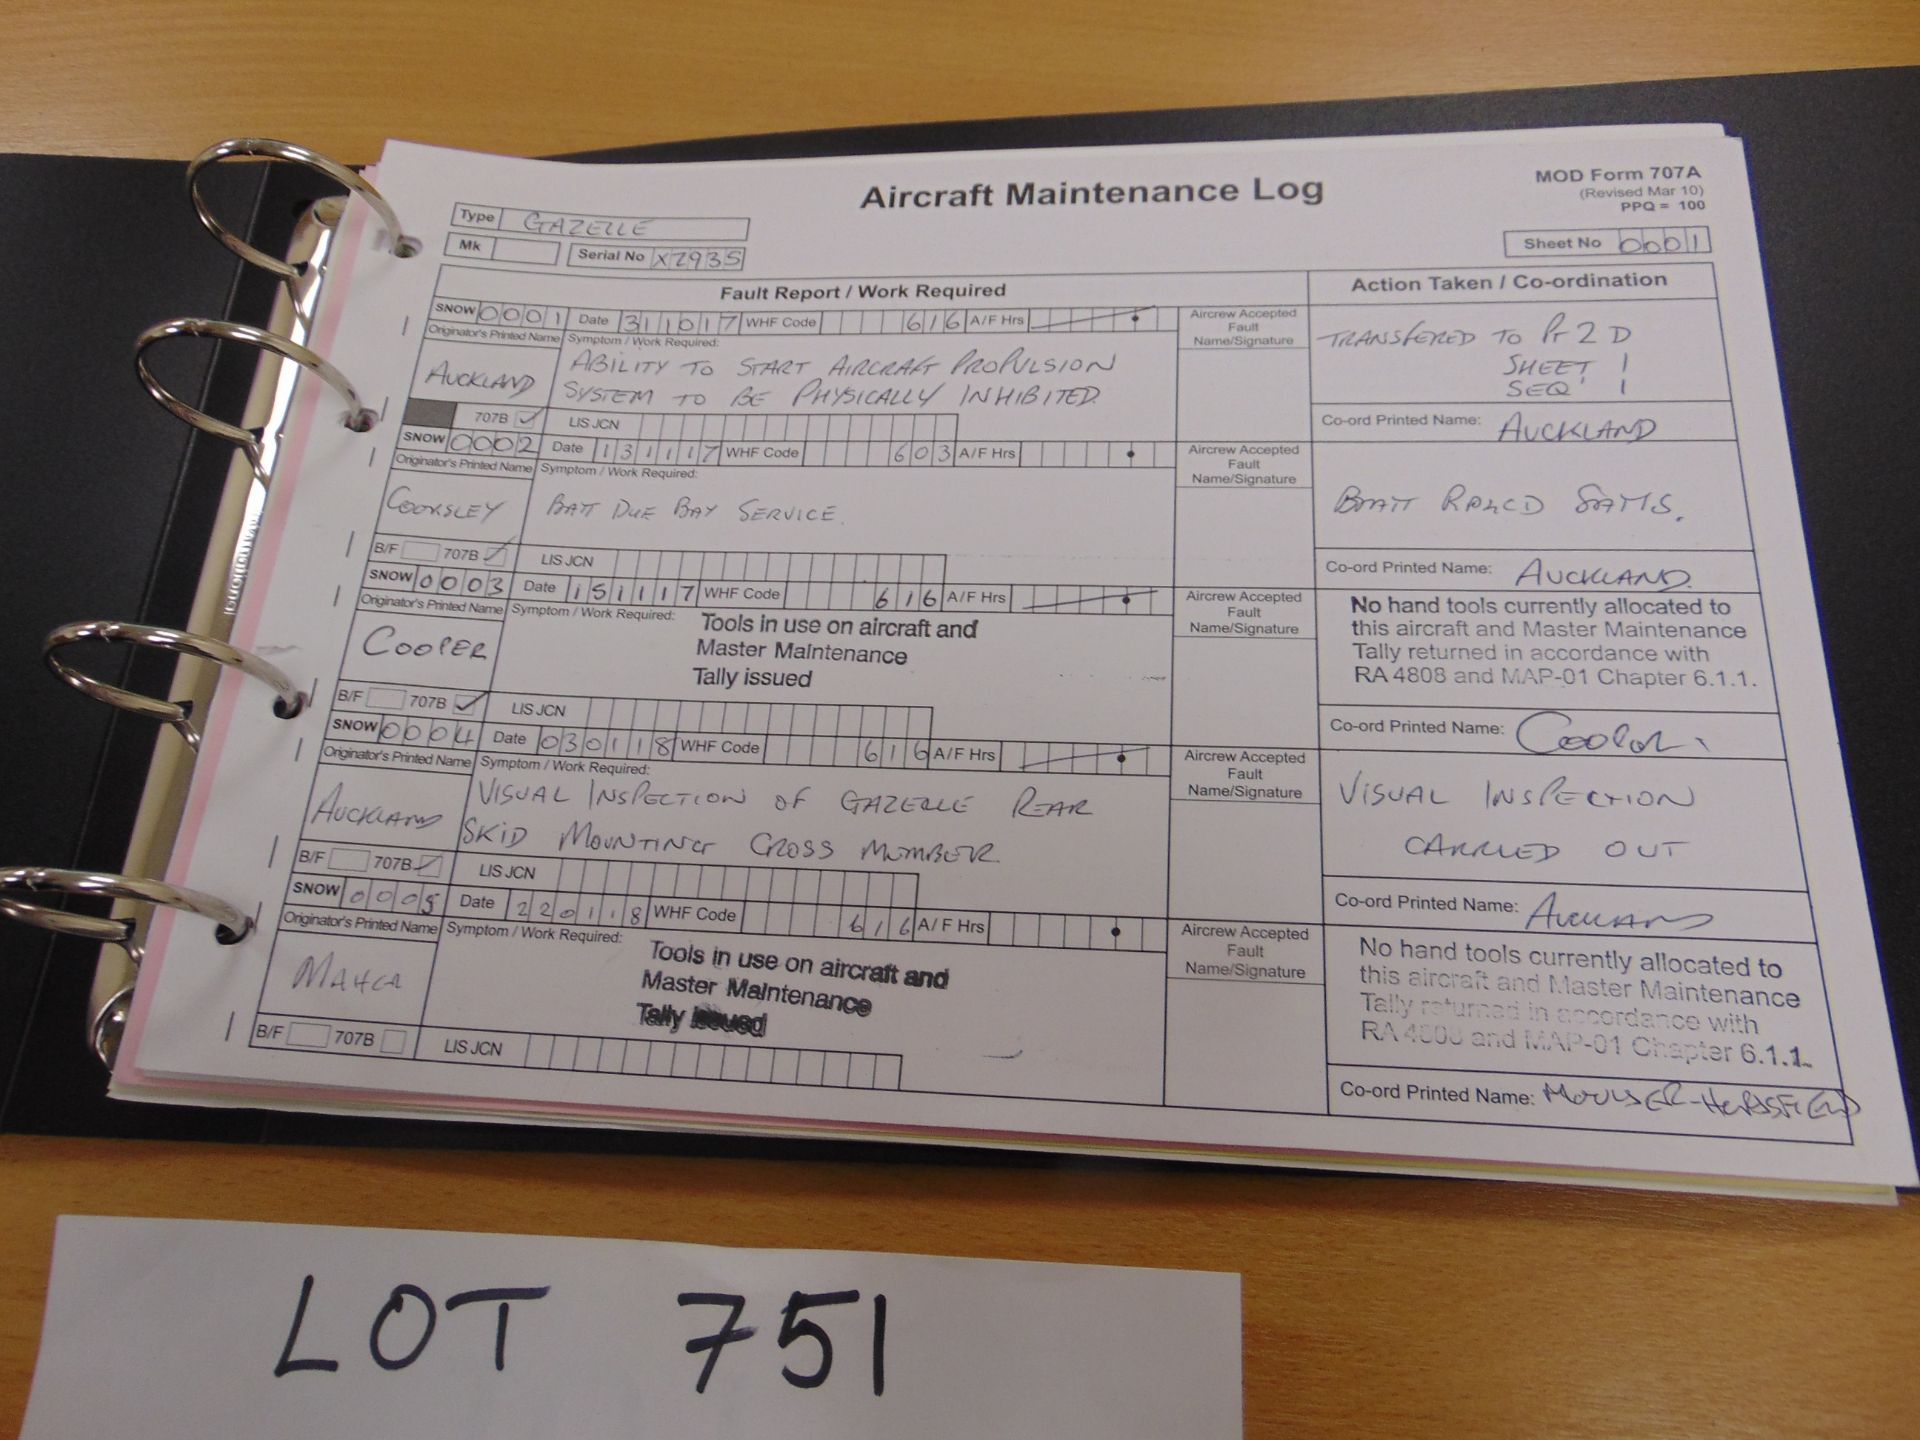 GAZELLE TURBINE HELICOPTER XZ935 Sn 1742 From the UK Ministry of Defence with paperwork as shown. - Image 22 of 22